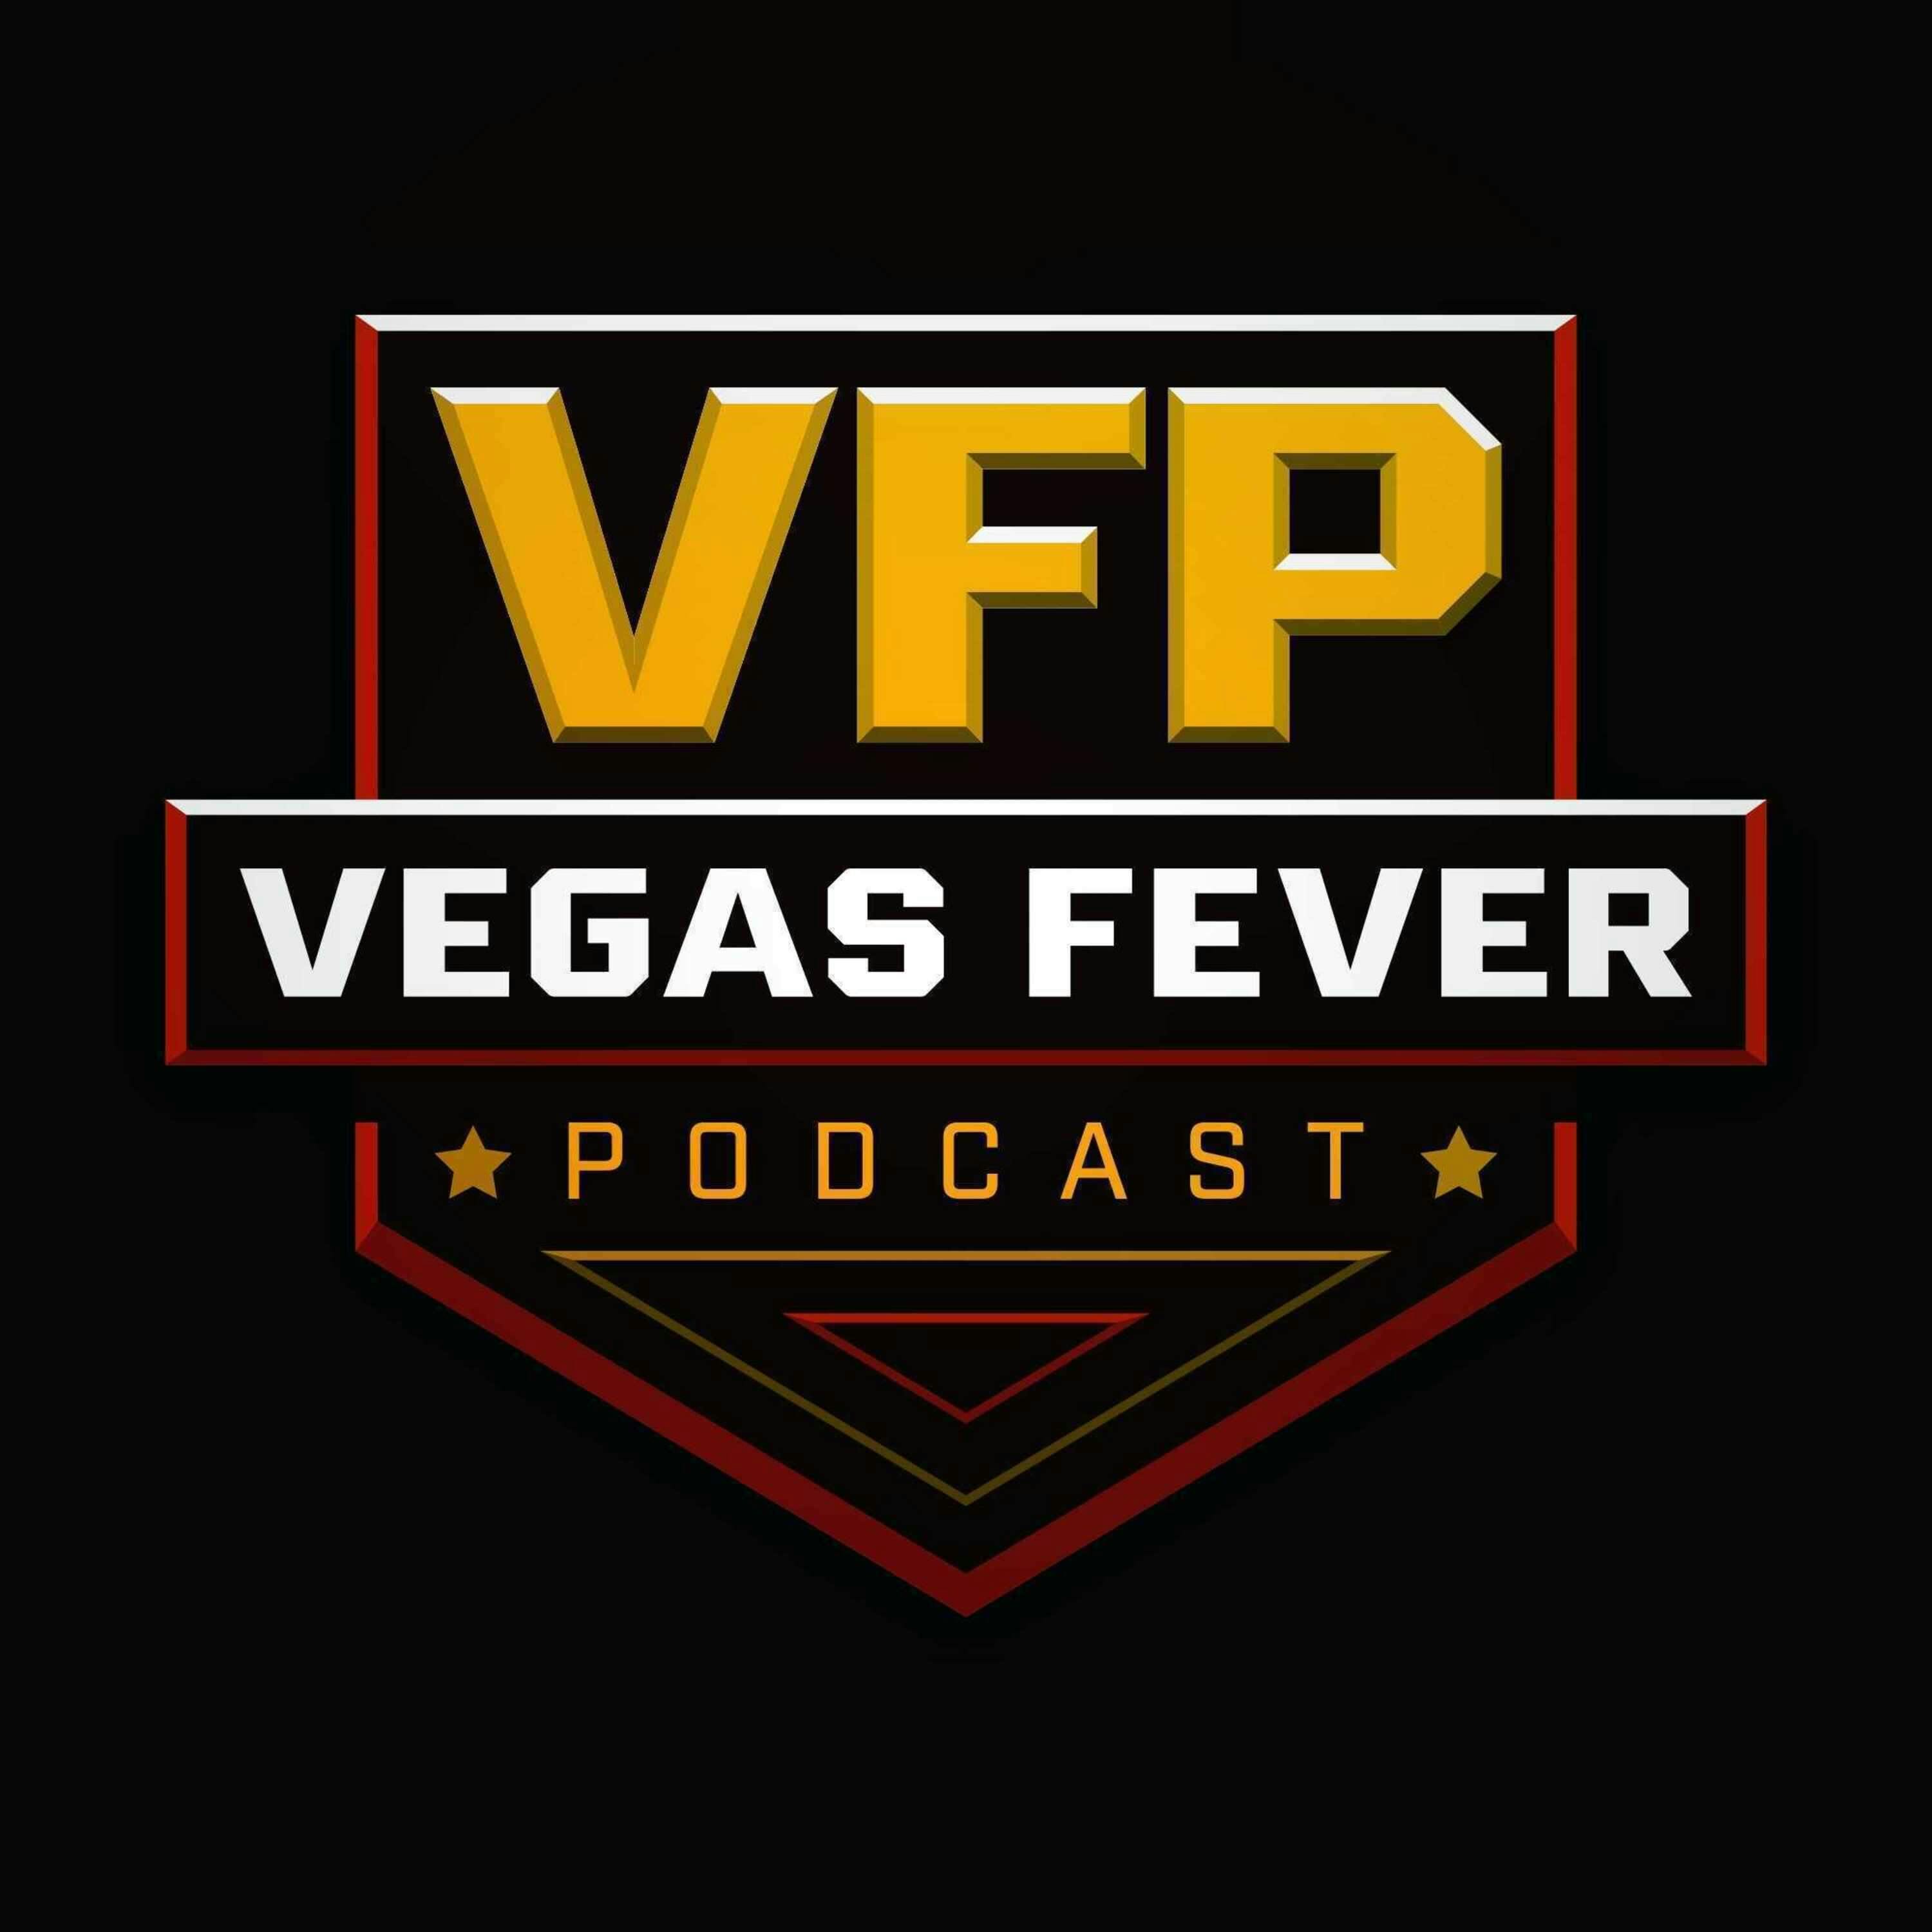 Episode 7 - Runnin Rebels win a couple of games, VGK slips against AZ and our guest is Tom Callahan.